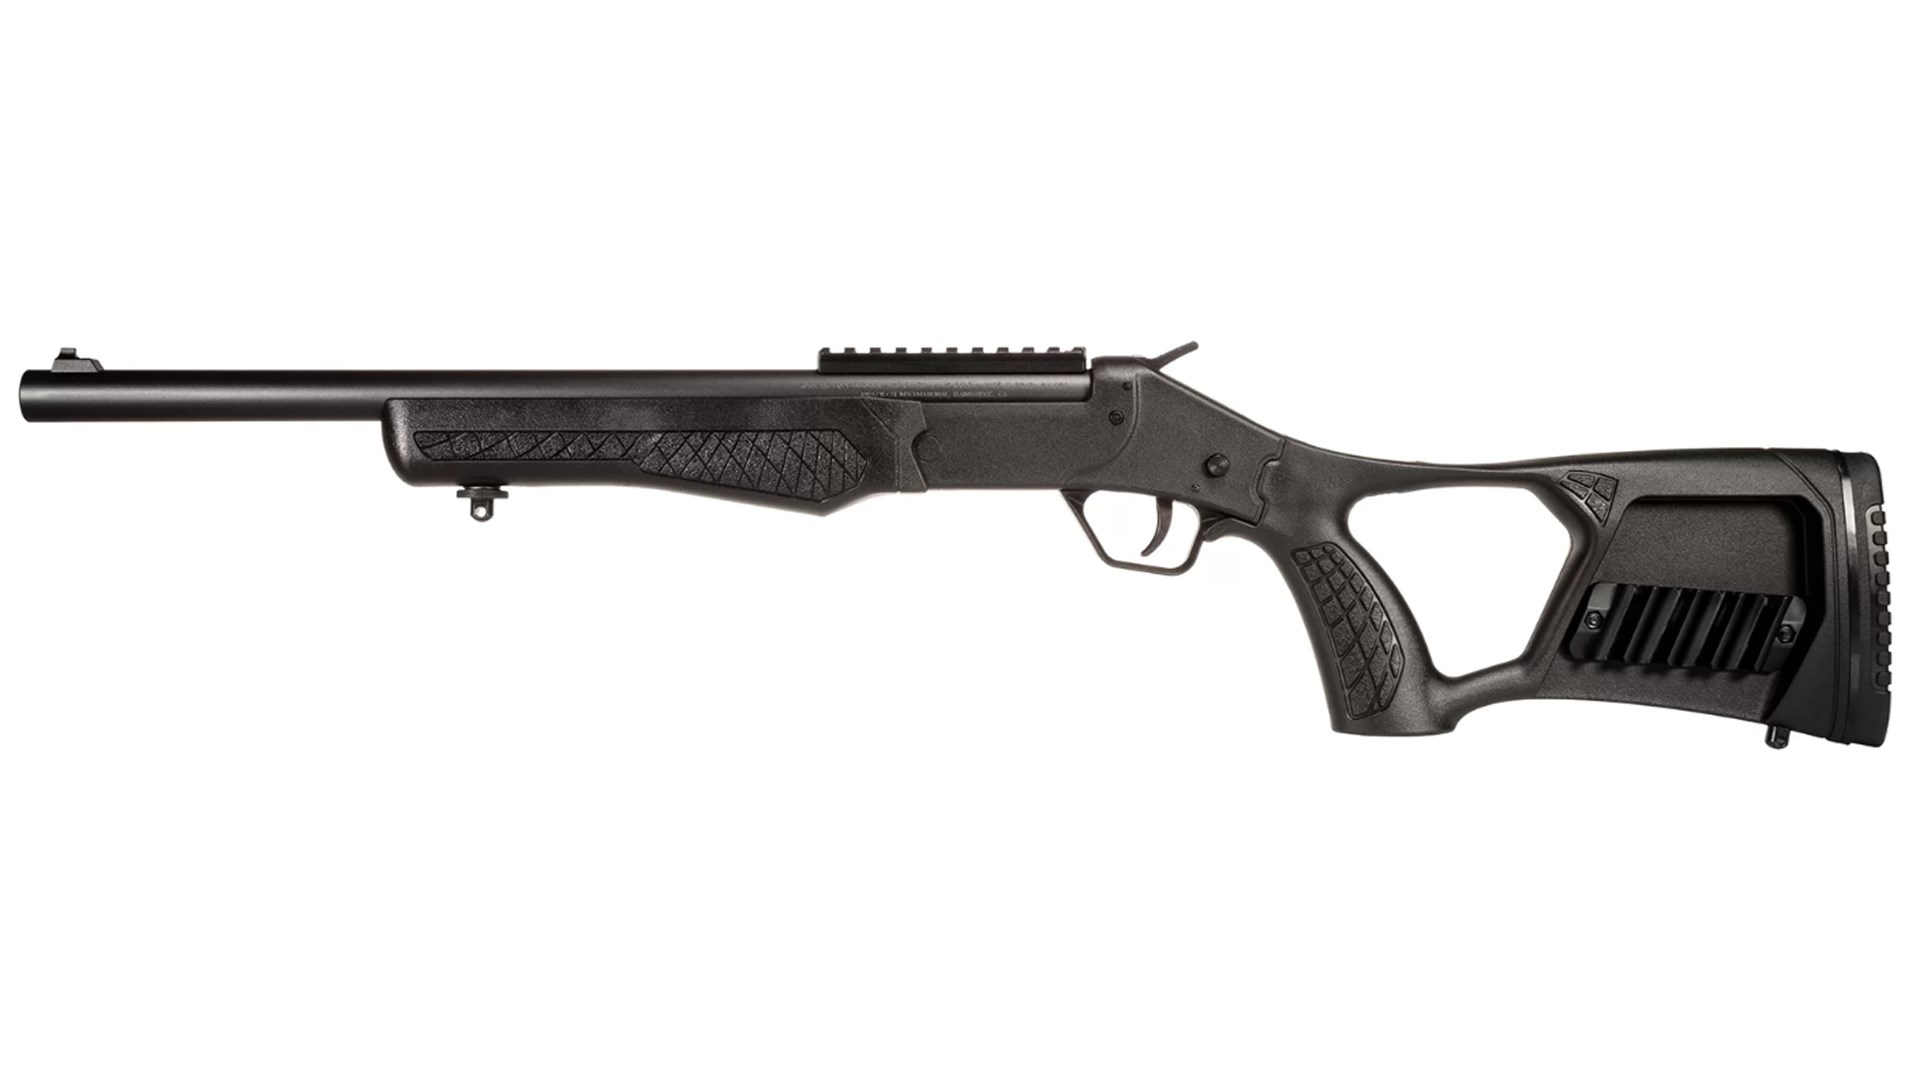 Left side of the all-black Rossi Poly Tuffy Survival Rifle.